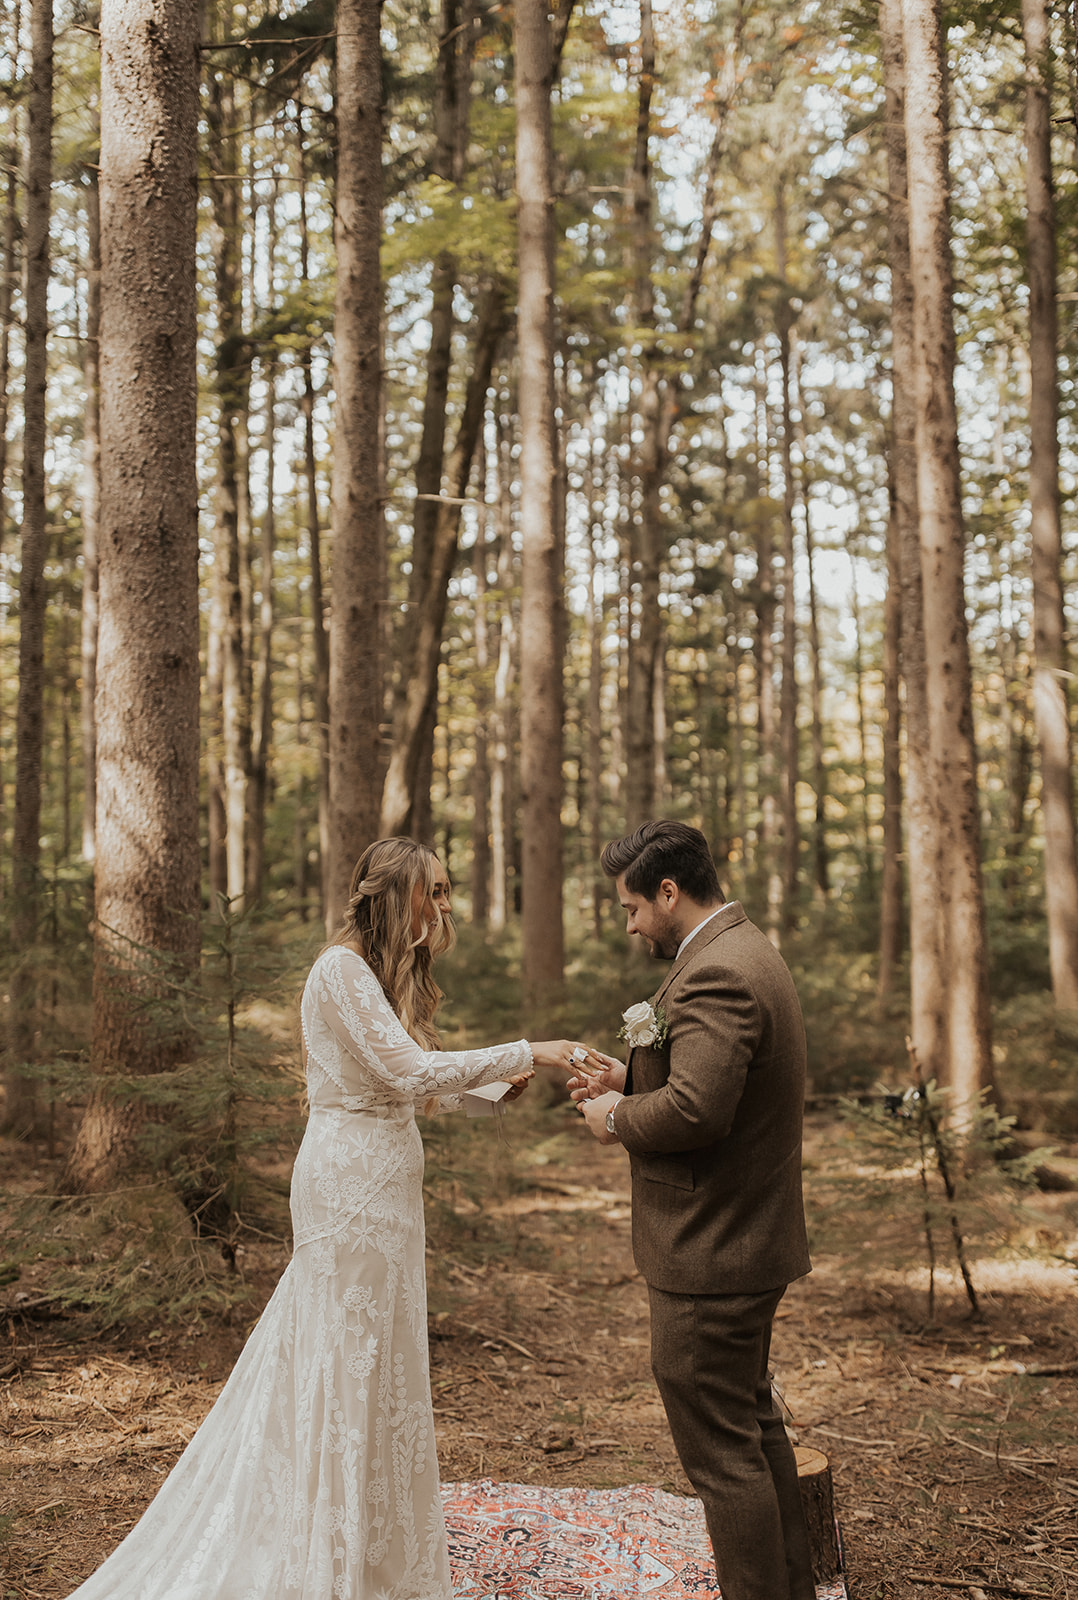 Romantic woodsy wedding in the pines